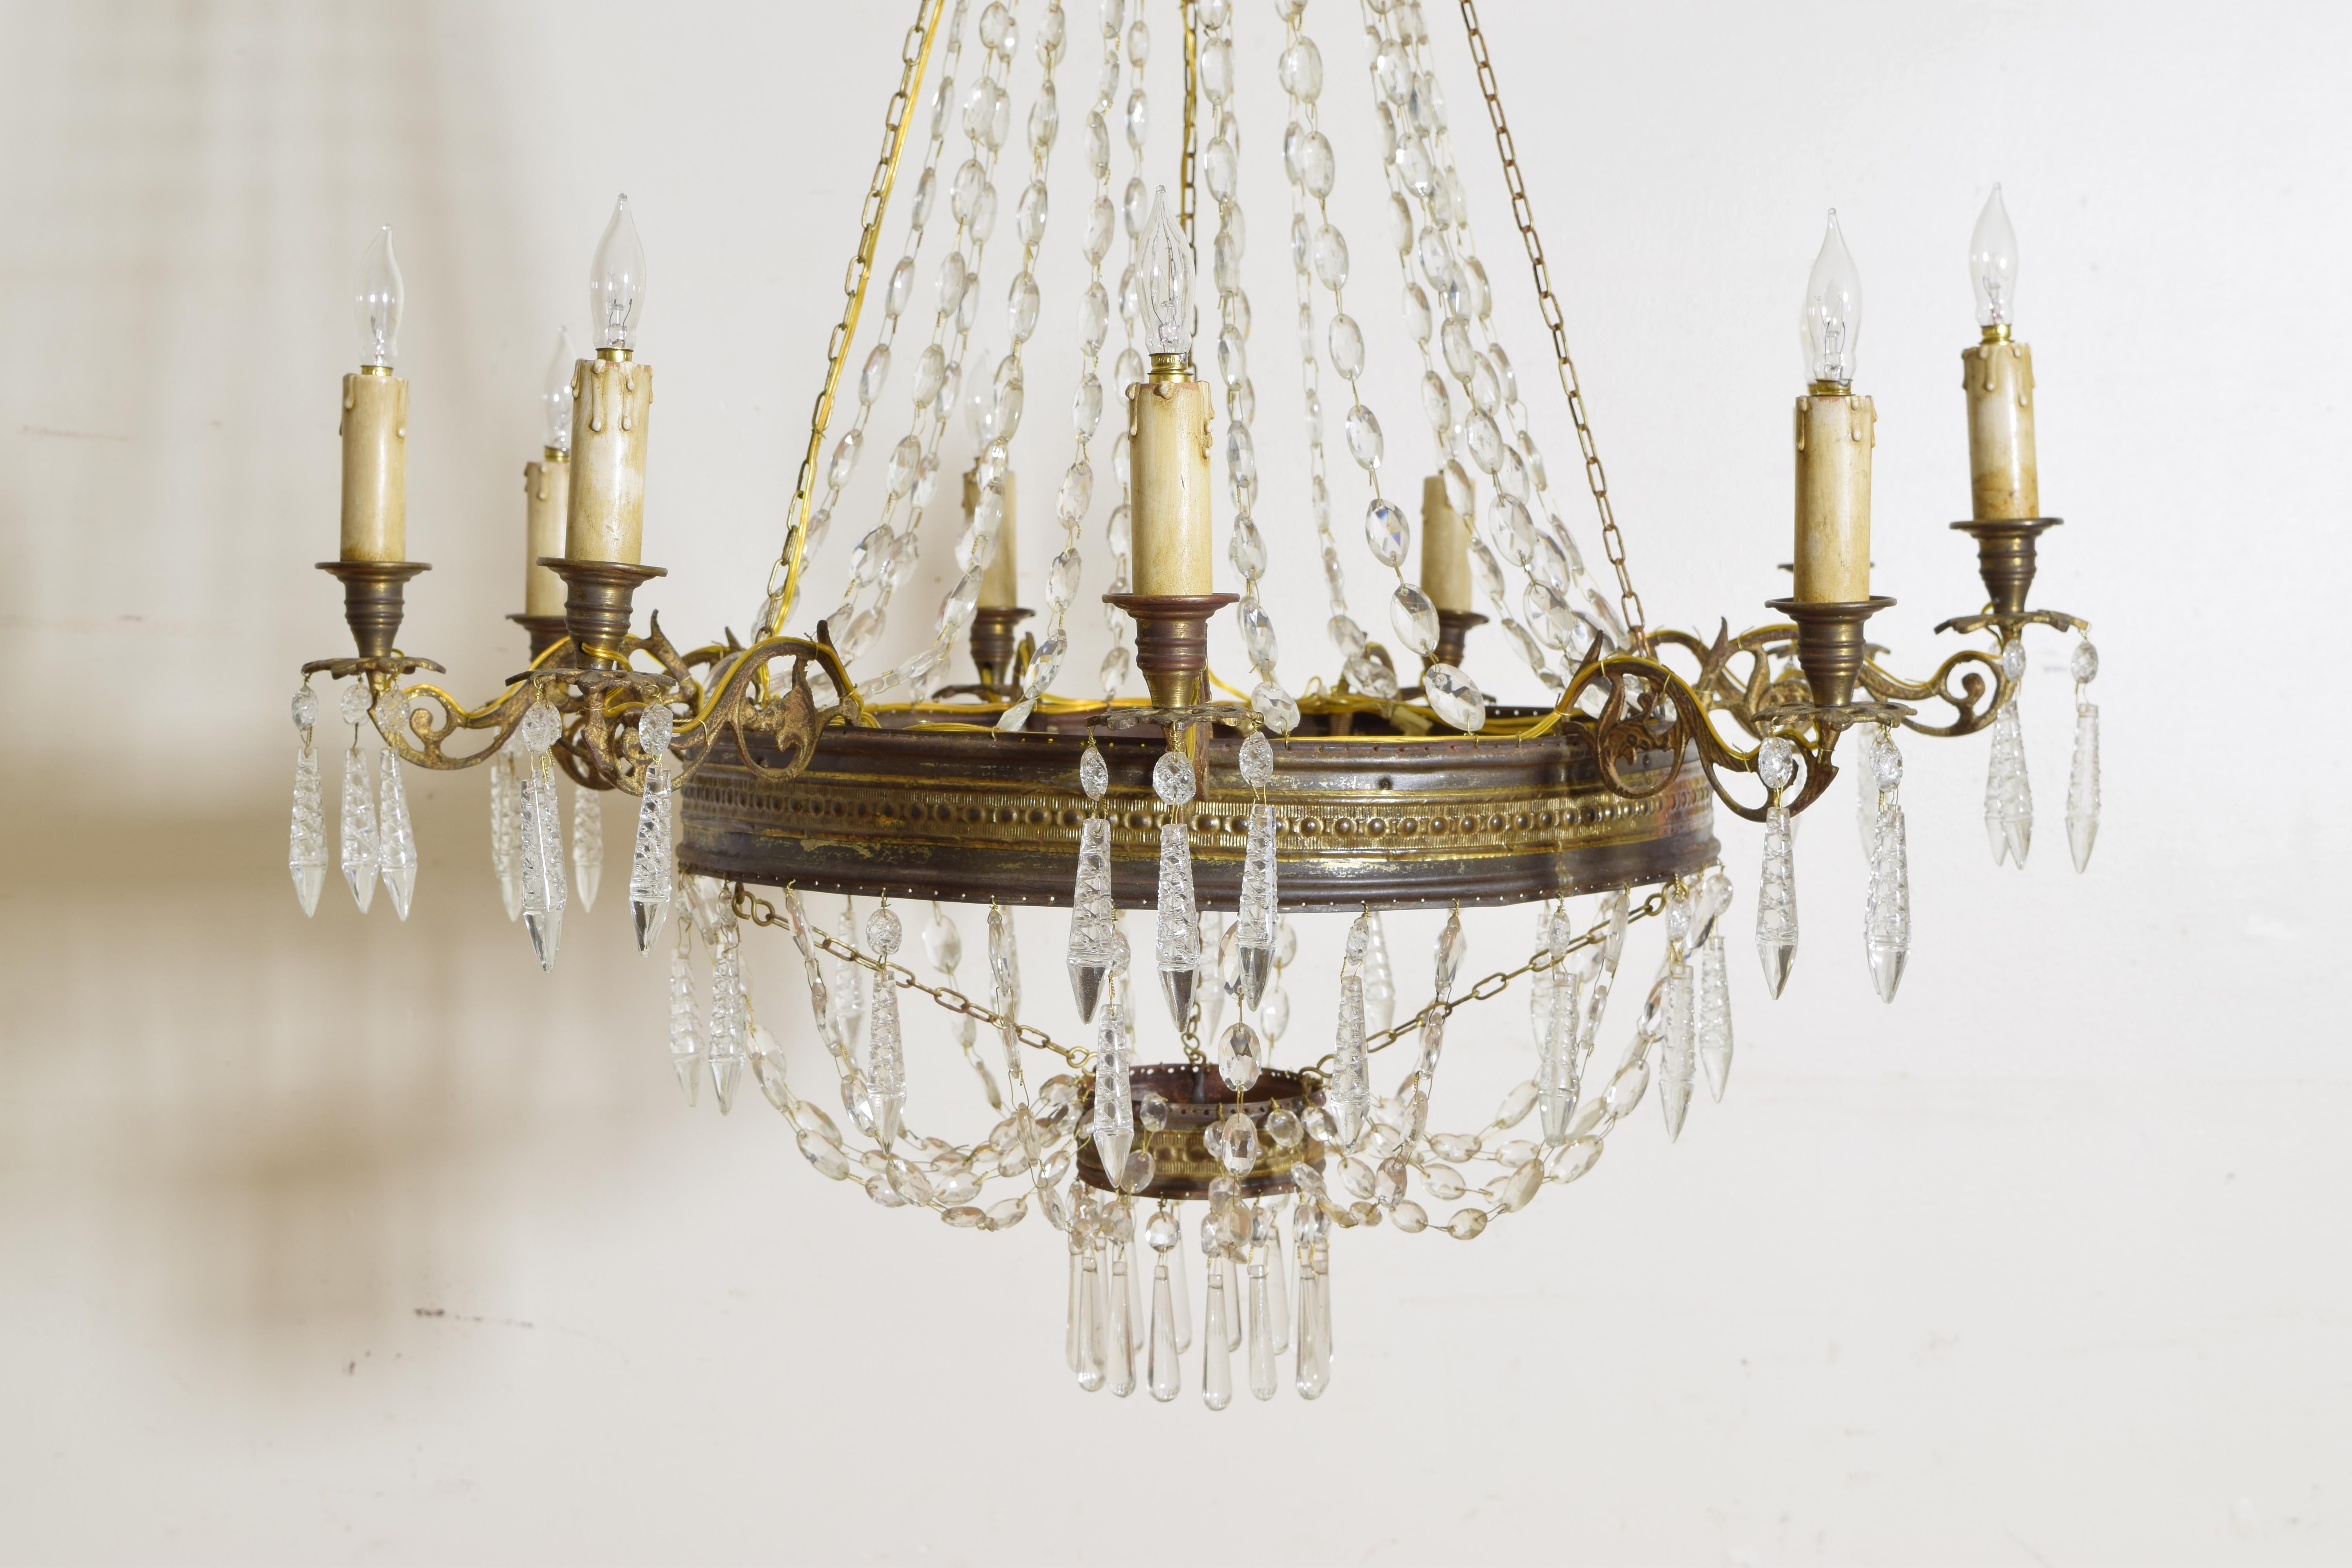 Italian Empire Period Brass, Silvered Brass, and Glass 9-Light Chandelier (Messing)